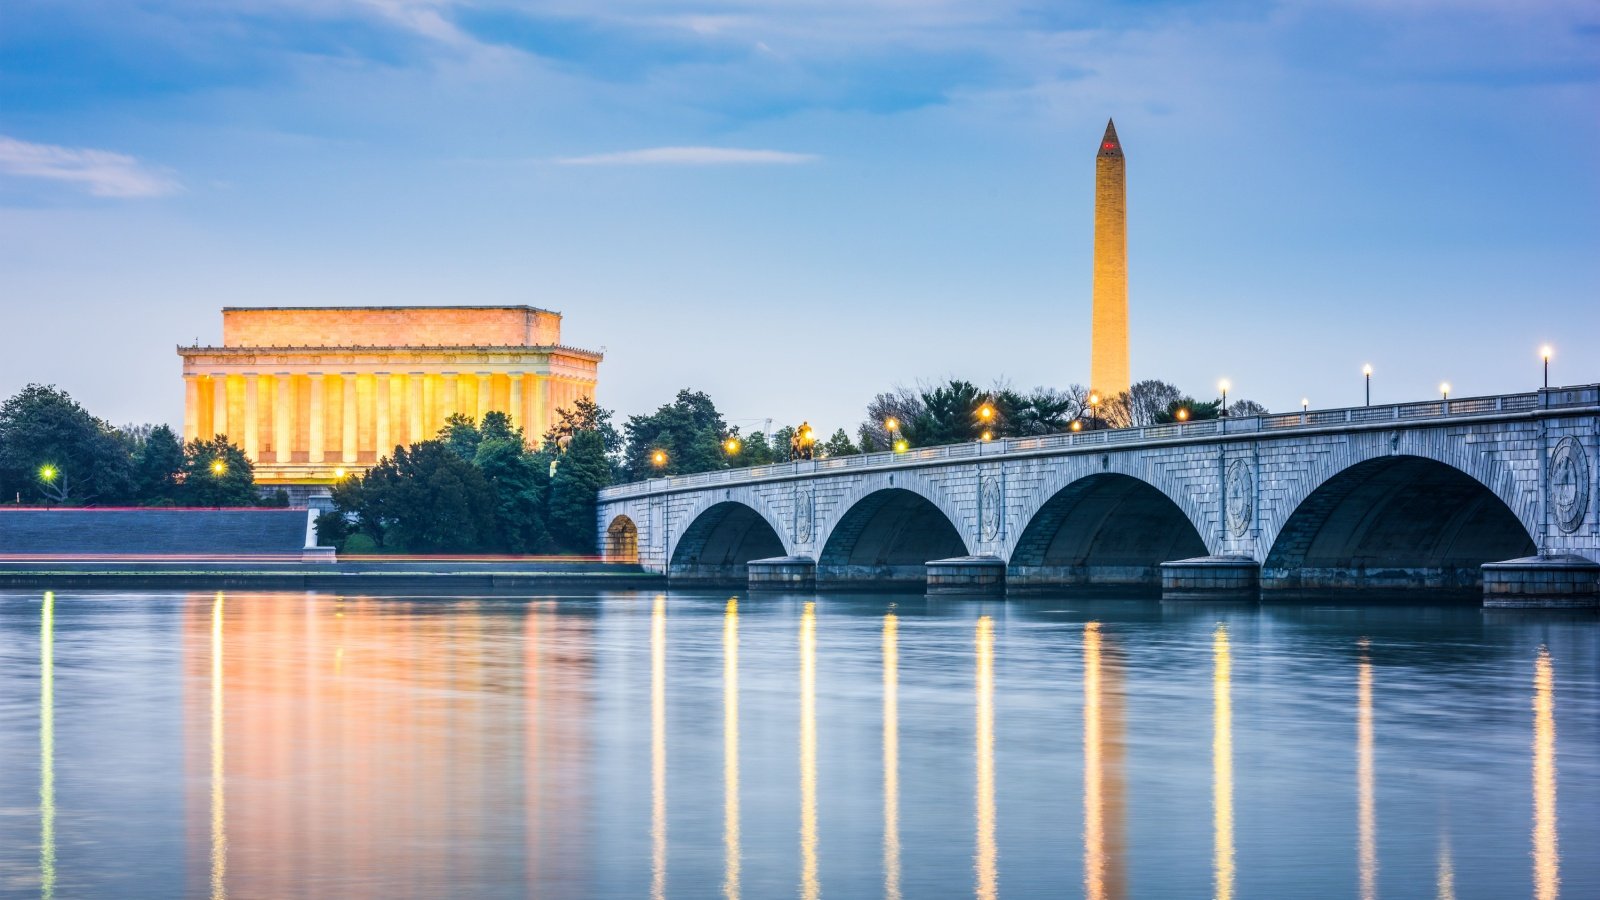 <p>If you visit Washington during the summer, why not enjoy the unique experience of watching a movie outside? If you can hire a babysitter, Thursday nights are date night movies. On Sundays, the Potomac screens family-friendly films from 6 p.m.</p>